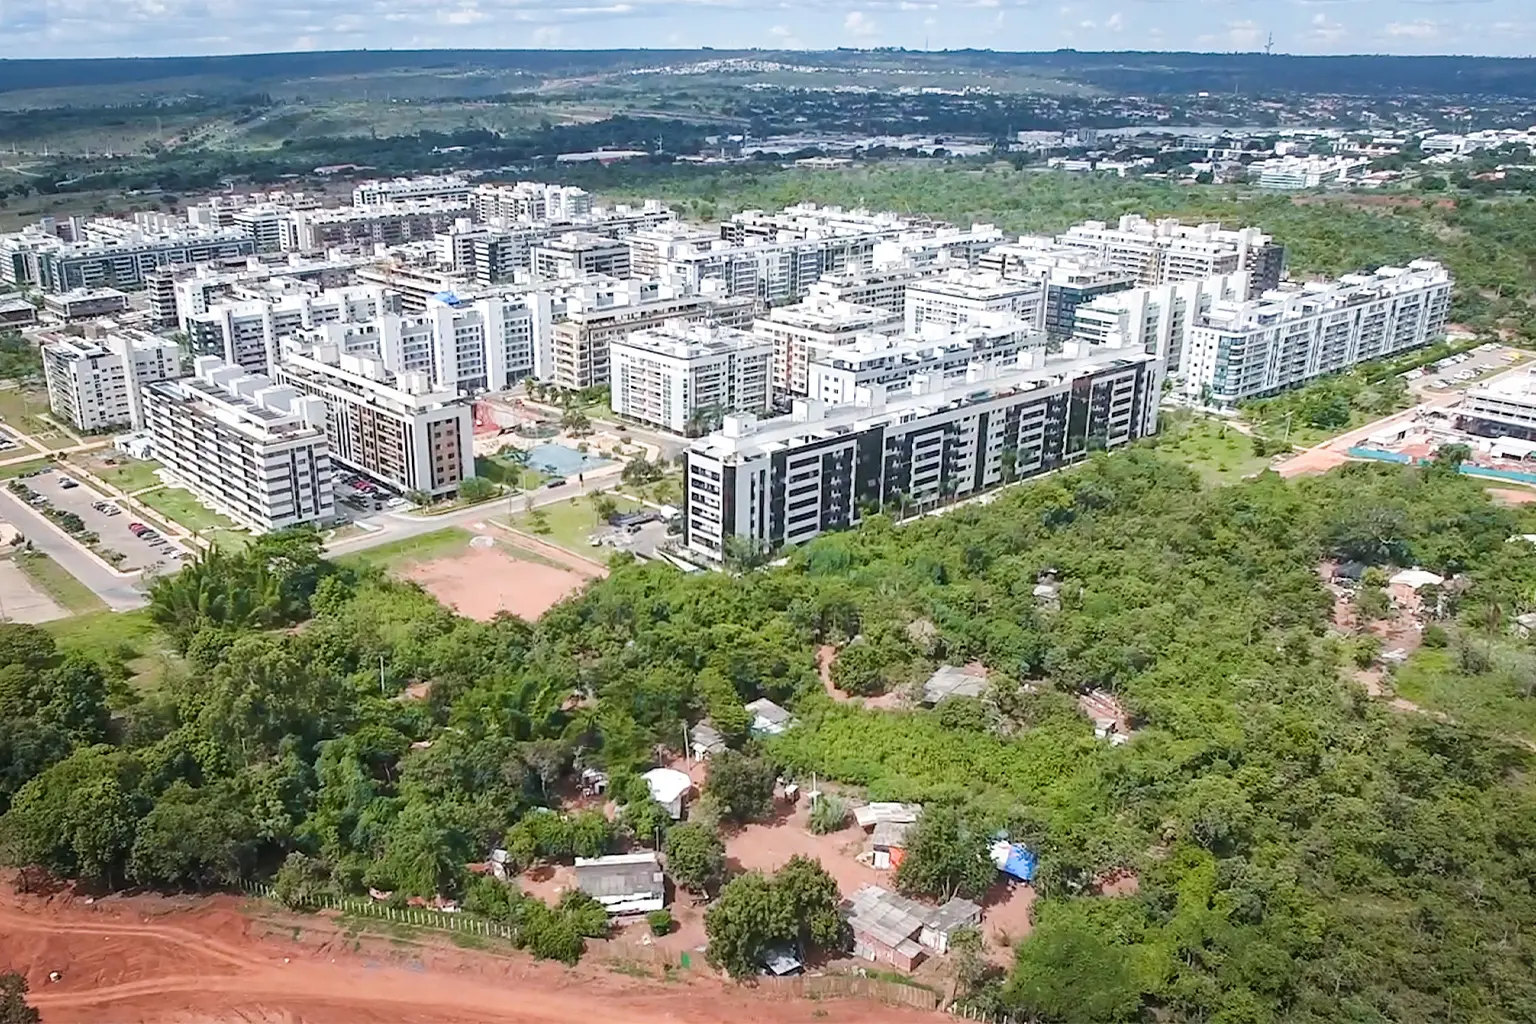 Aerial view of forested area next to apartment buildings.